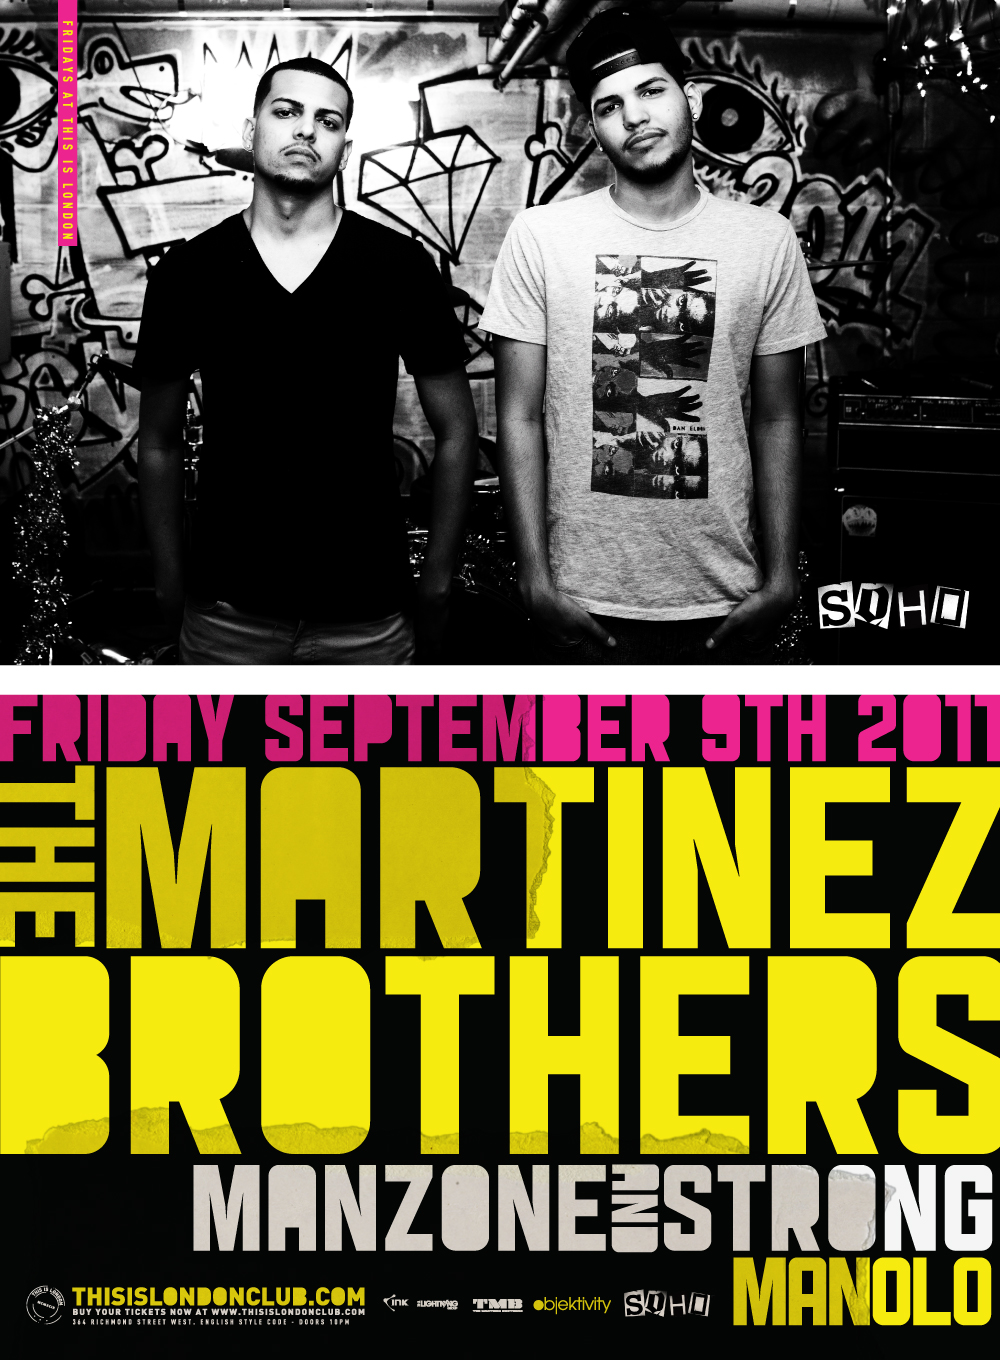 THE MARTINEZ BROTHERS at THIS IS LONDON | SOHO Fridays | SEP 9